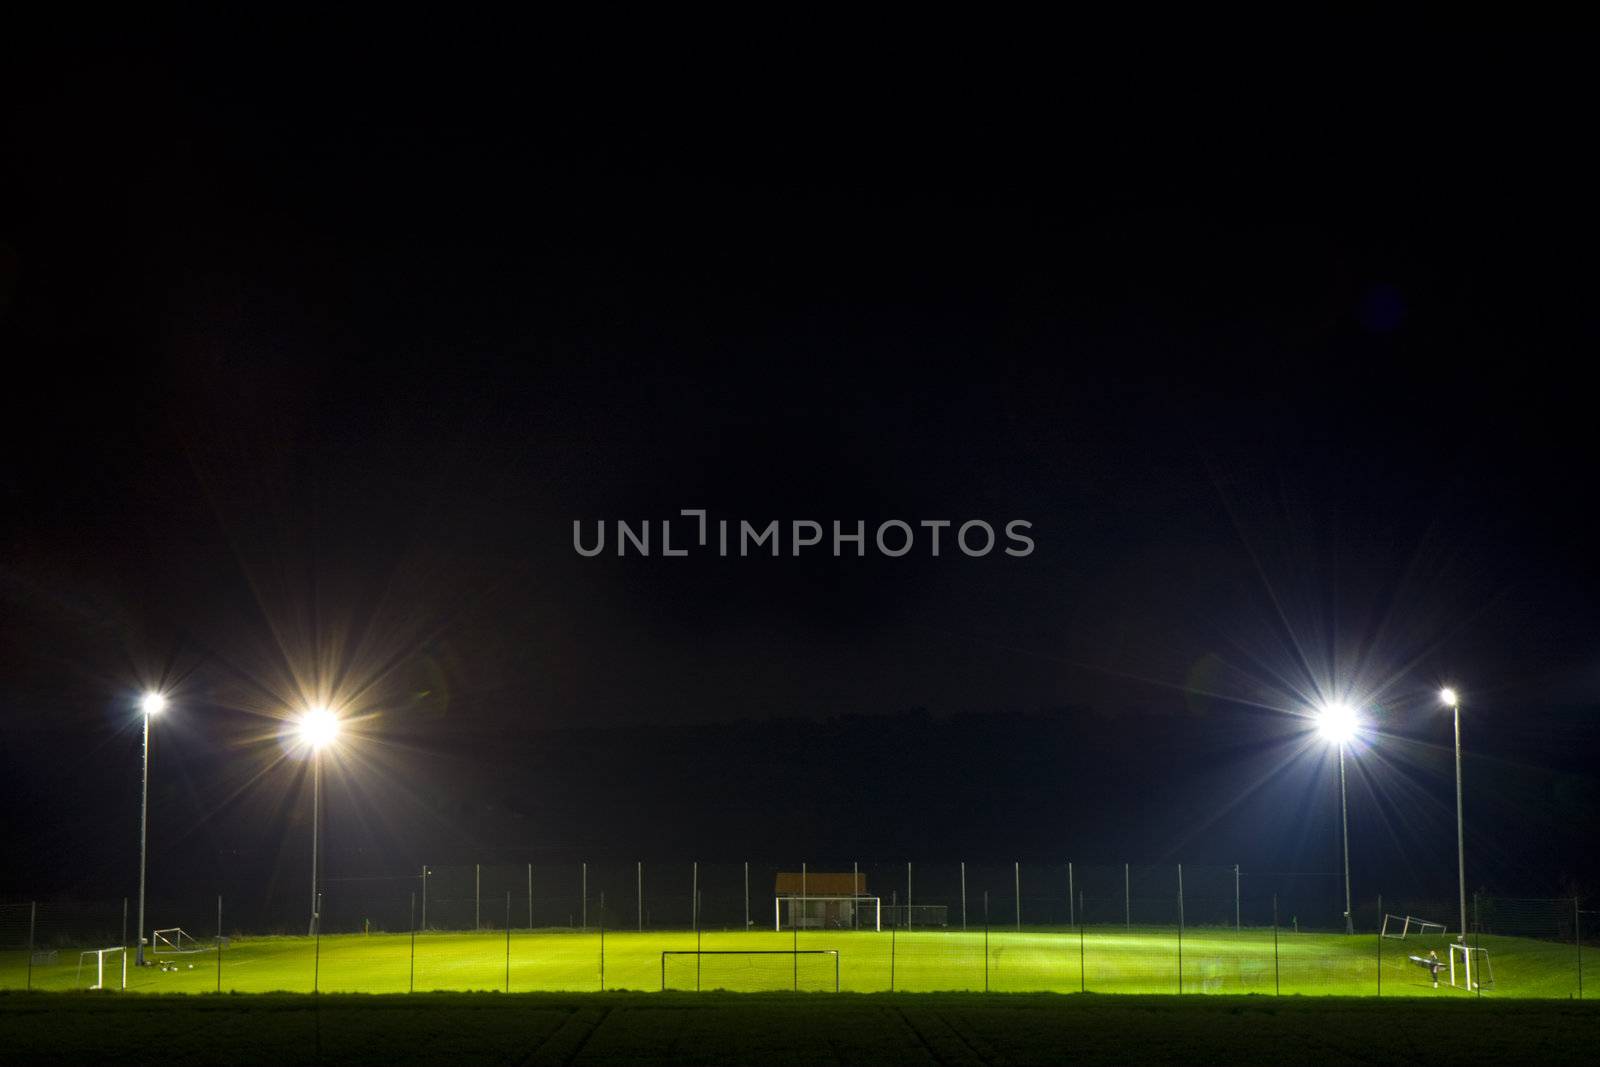 empty soccer pitch illuminated at night by bernjuer